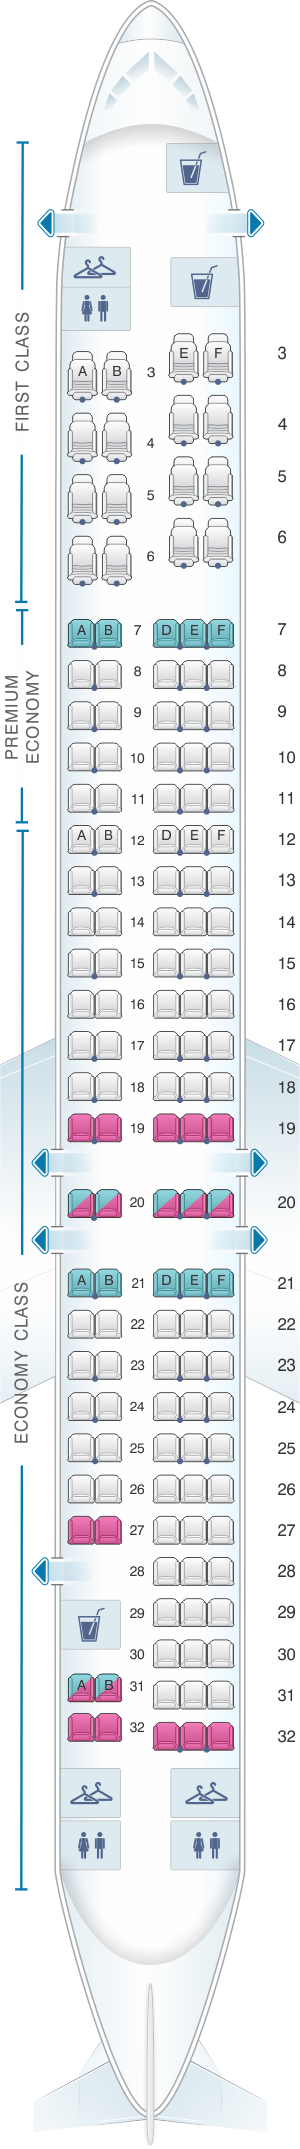 What is the MD 80 seating chart?